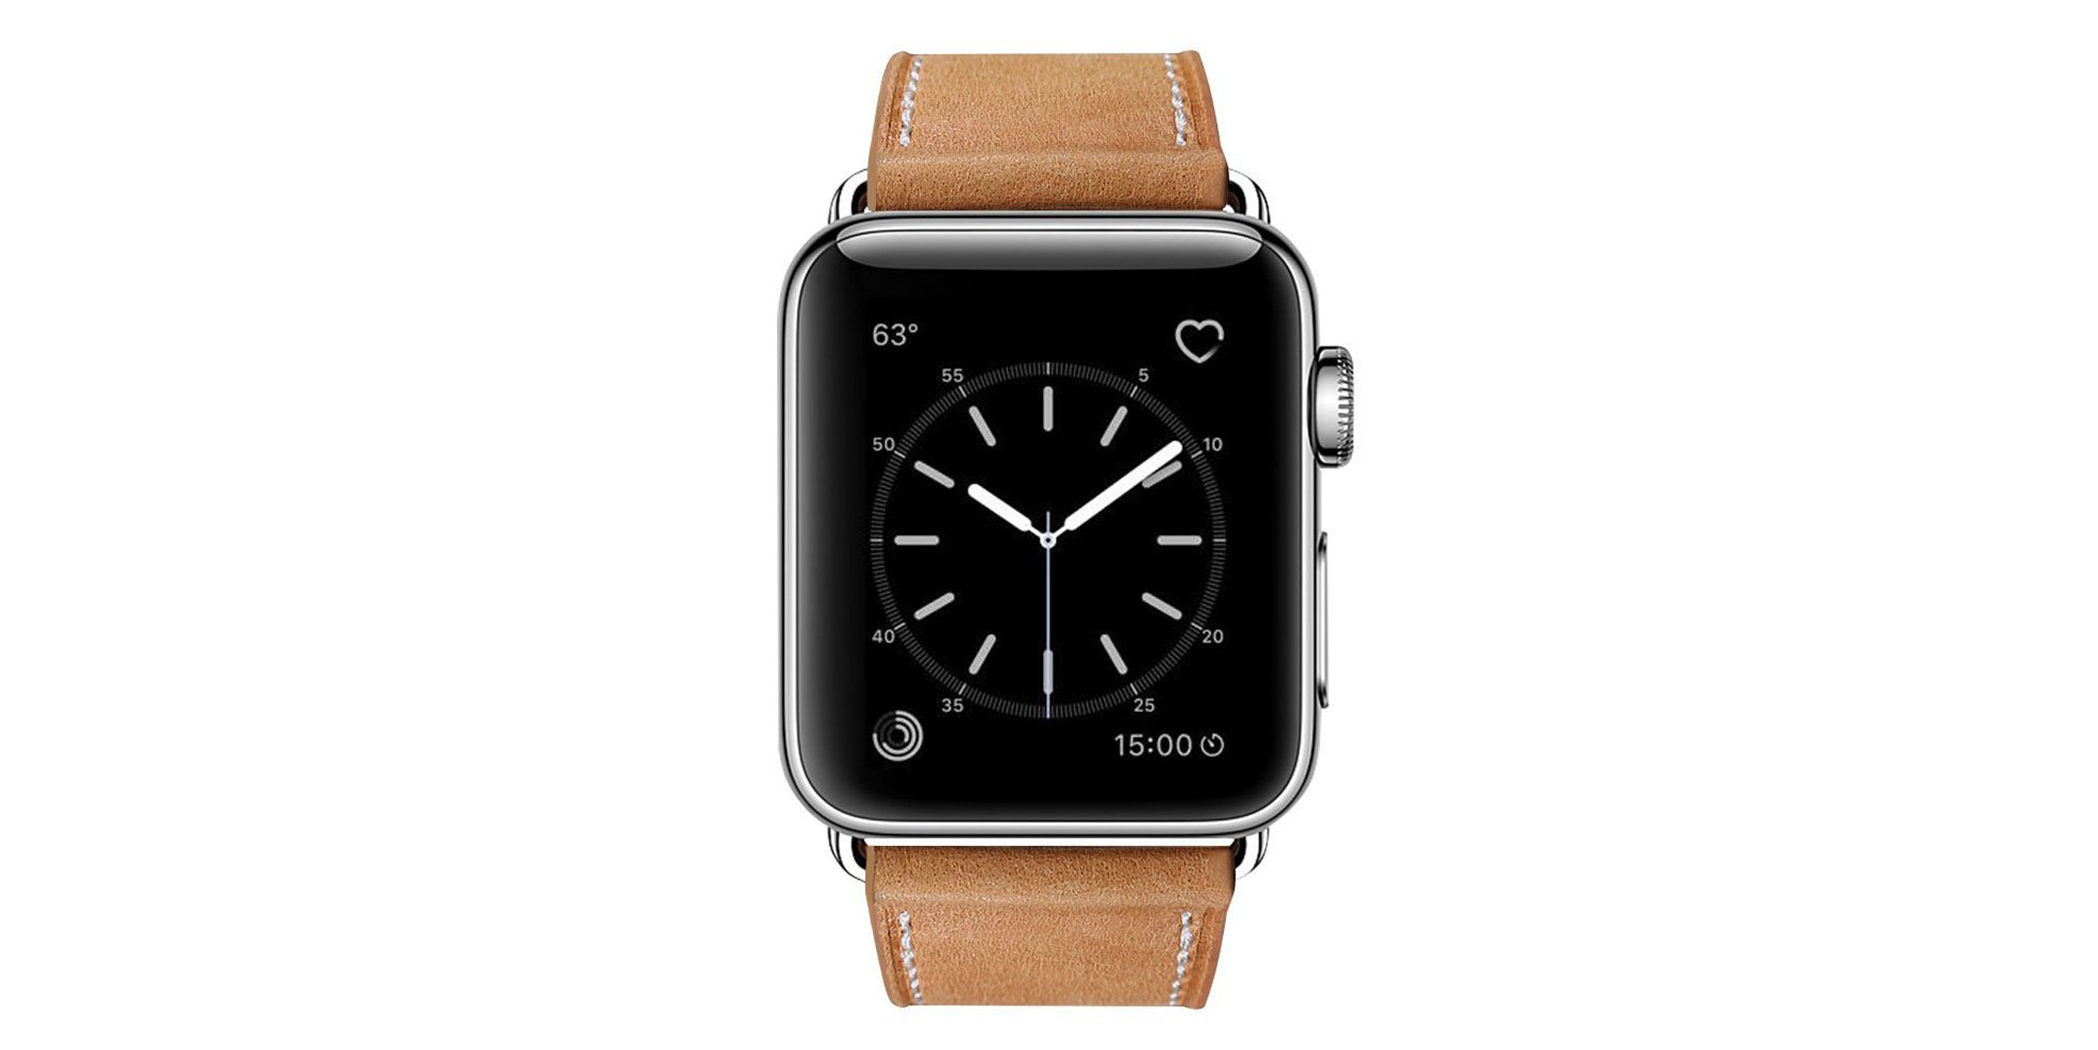 Trade out your Apple Watch band for this top-rated leather option at $9